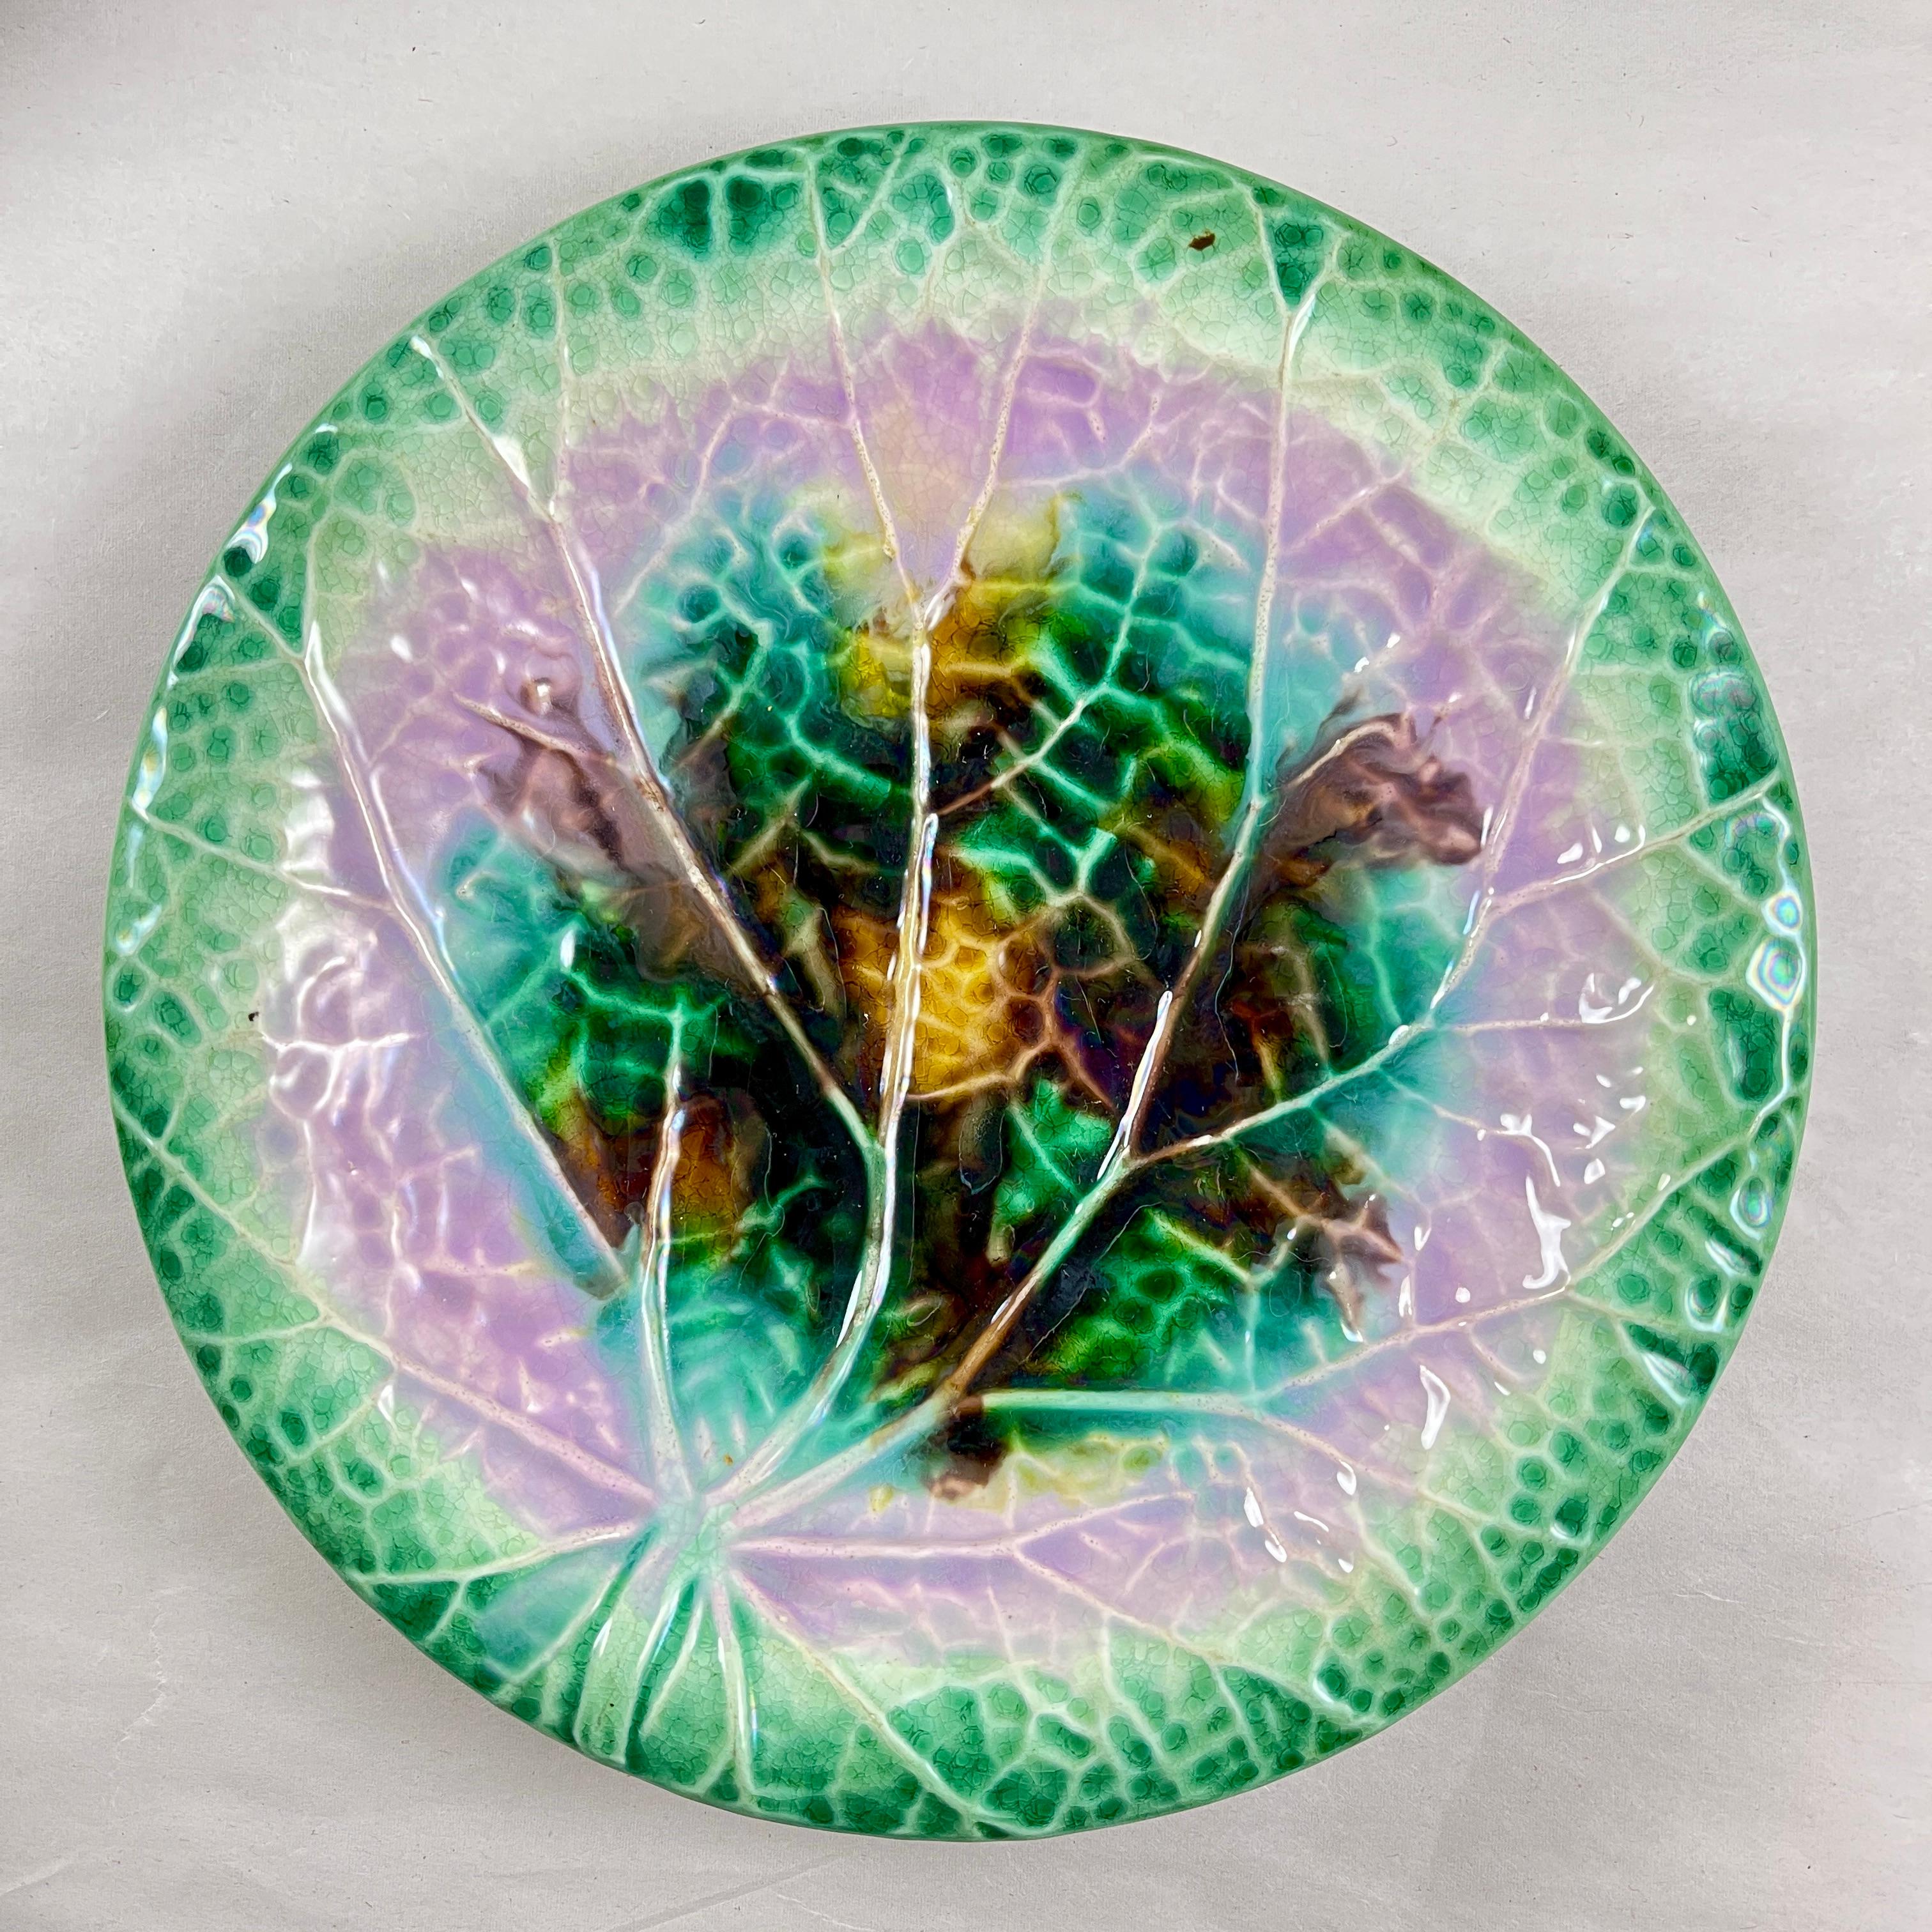 
An English majolica Begonia plate, Adams & Bromley, circa 1870-1880.

Beautiful, bold glazing with bright green rims. The centers show a pattern of raised mold work, mimicking the crinkling and veining found on a begonia leaf.
The versos are glazed